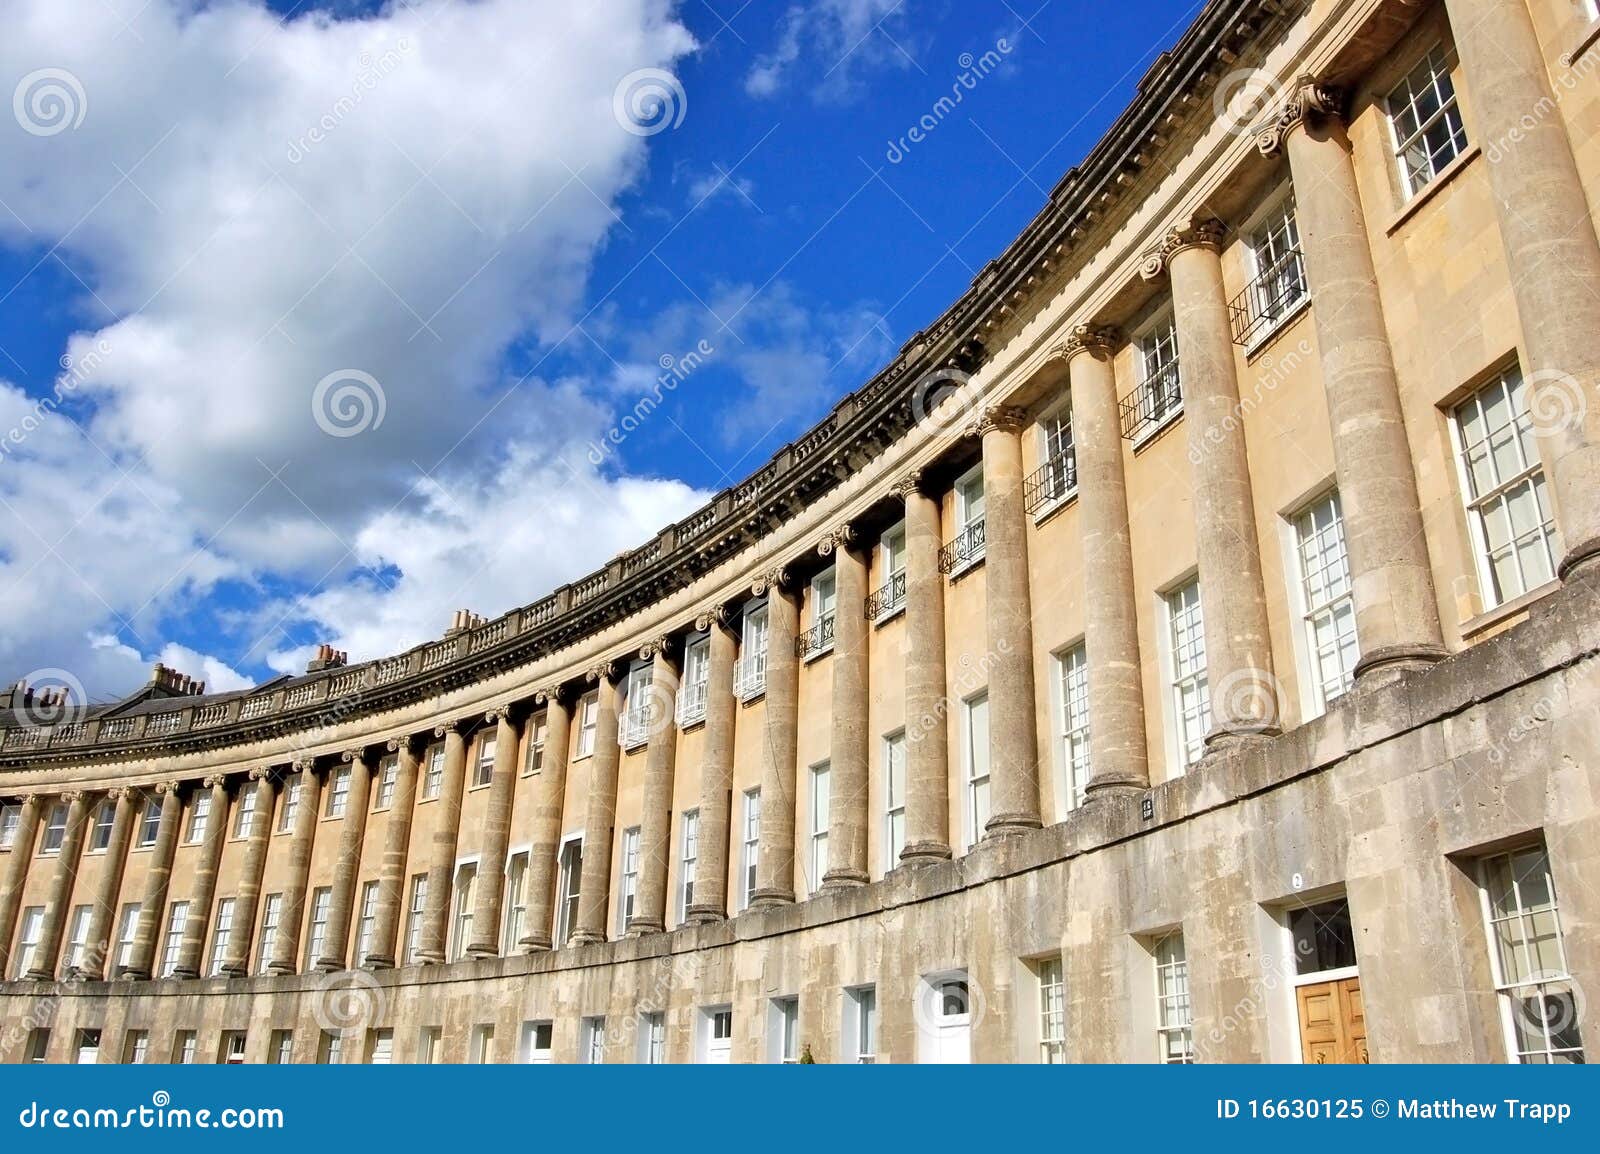 Royal Crescent Building In Bath England Stock Image Image Of